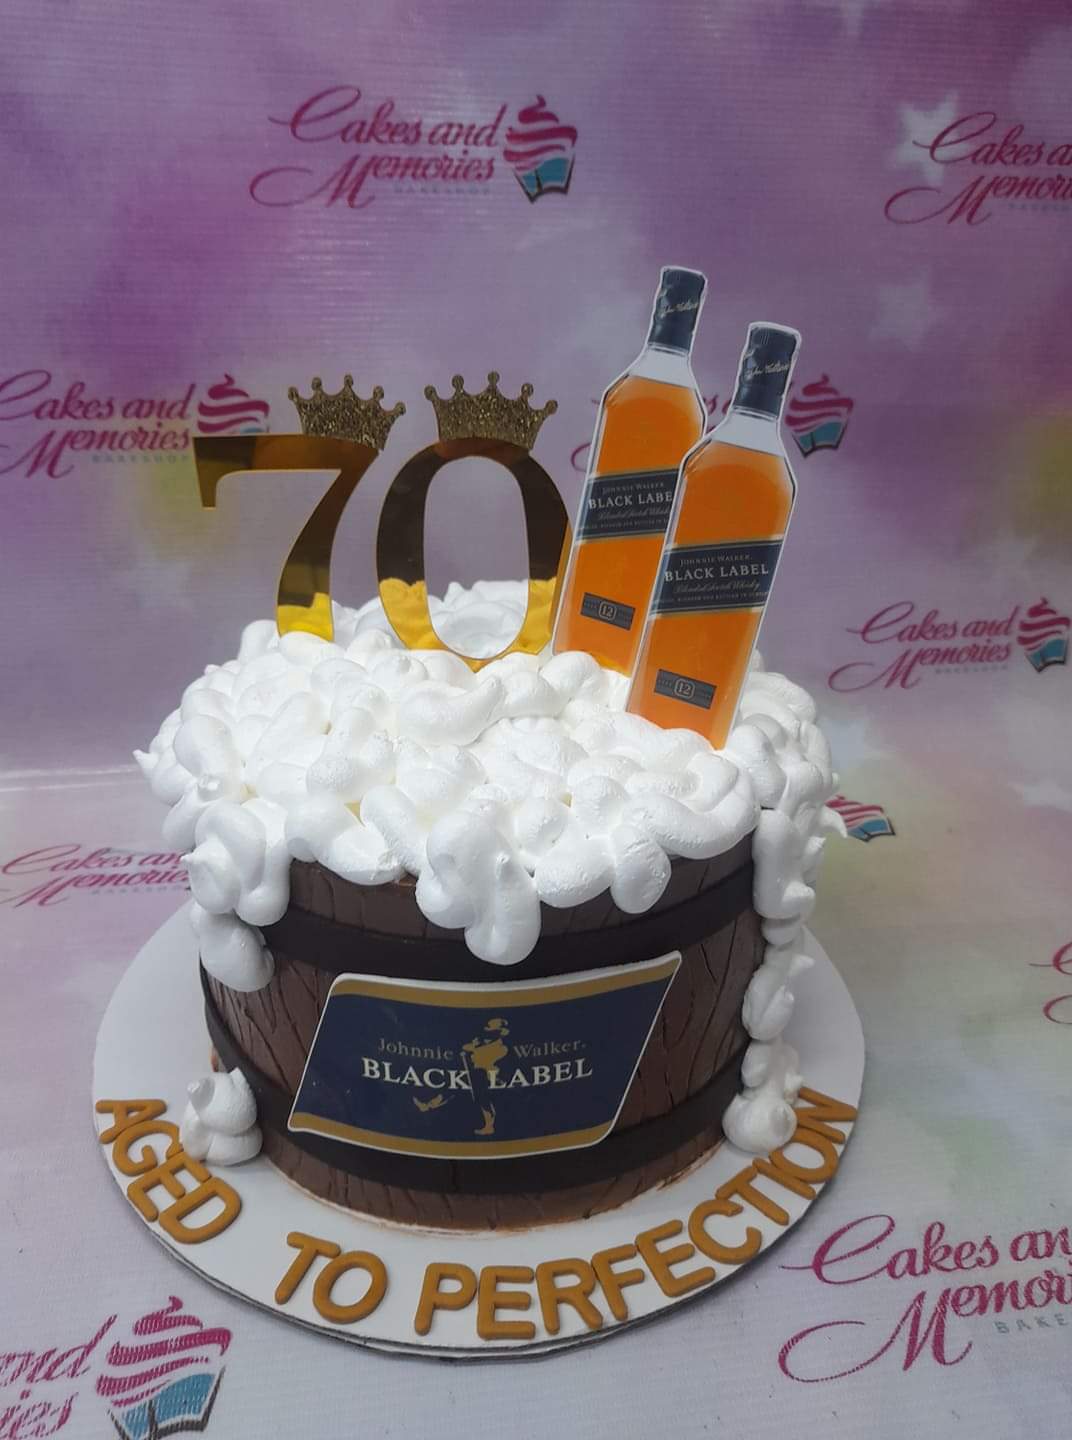 Black Label Cake is a vanilla cake 3 pounds. Send happiness for special  fancy with our birthday cake